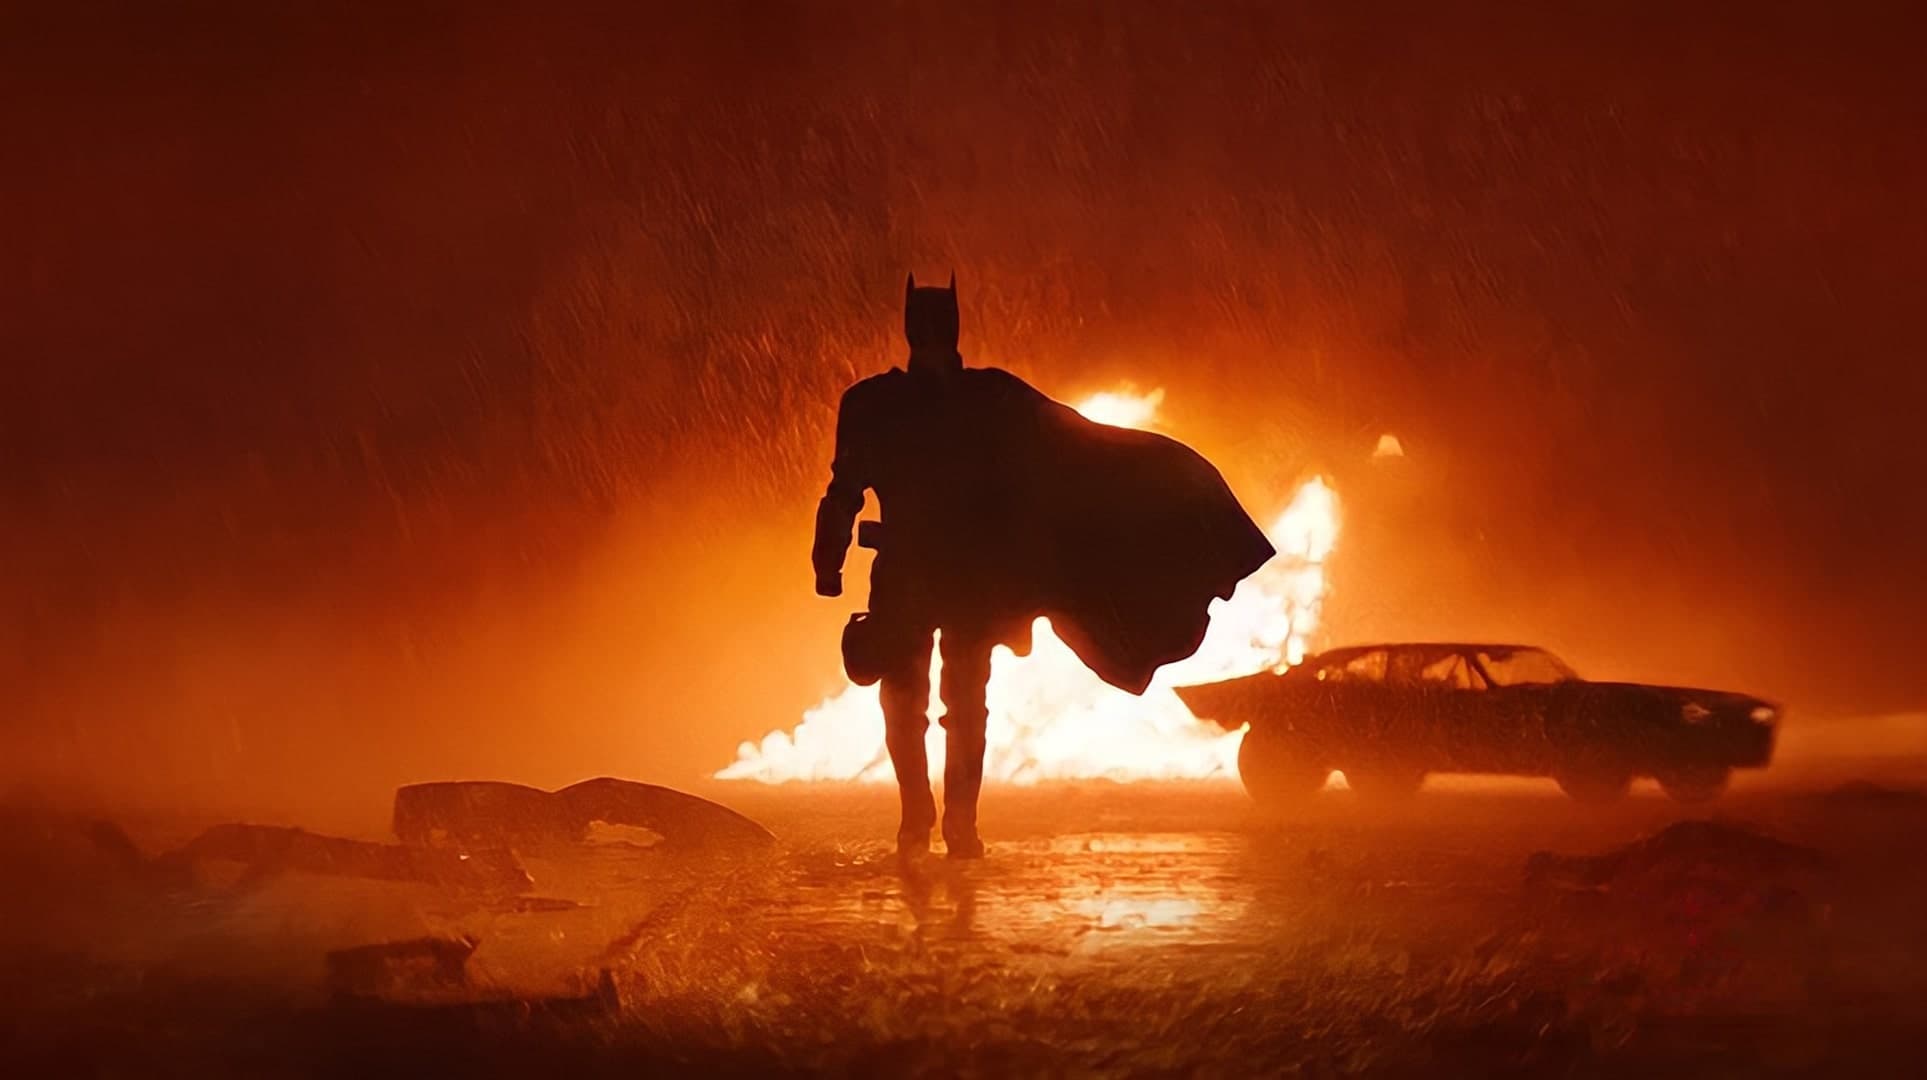 Why The Batman Deserved Oscar for Cinematography?